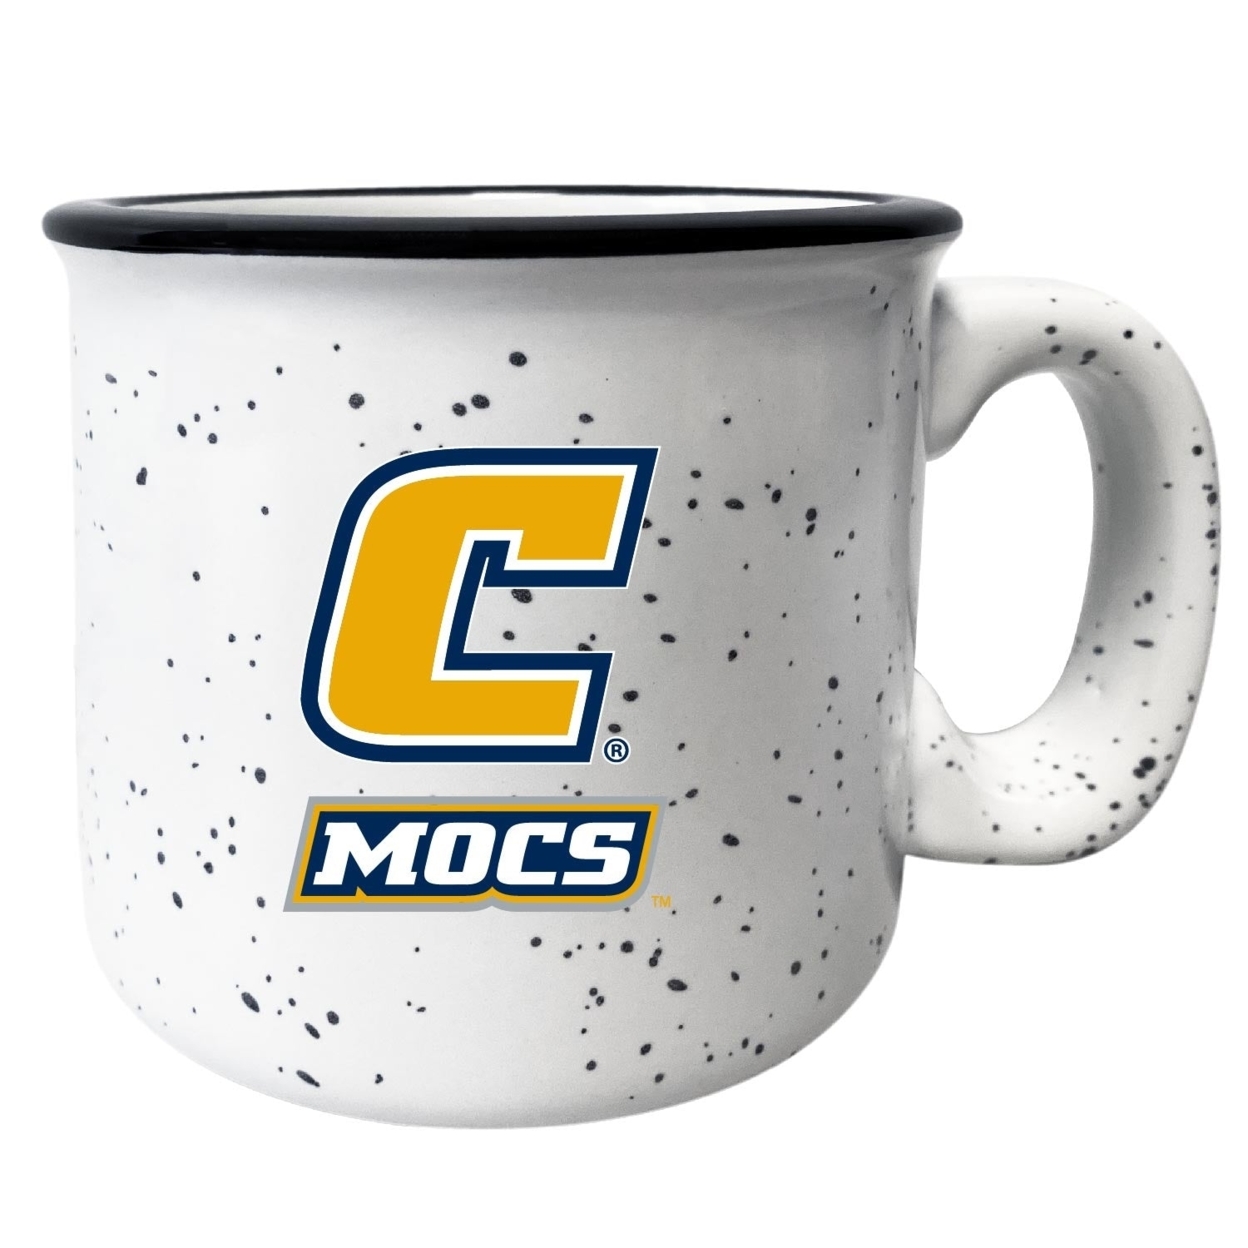 University Of Tennessee At Chattanooga Speckled Ceramic Camper Coffee Mug - Choose Your Color - Grey